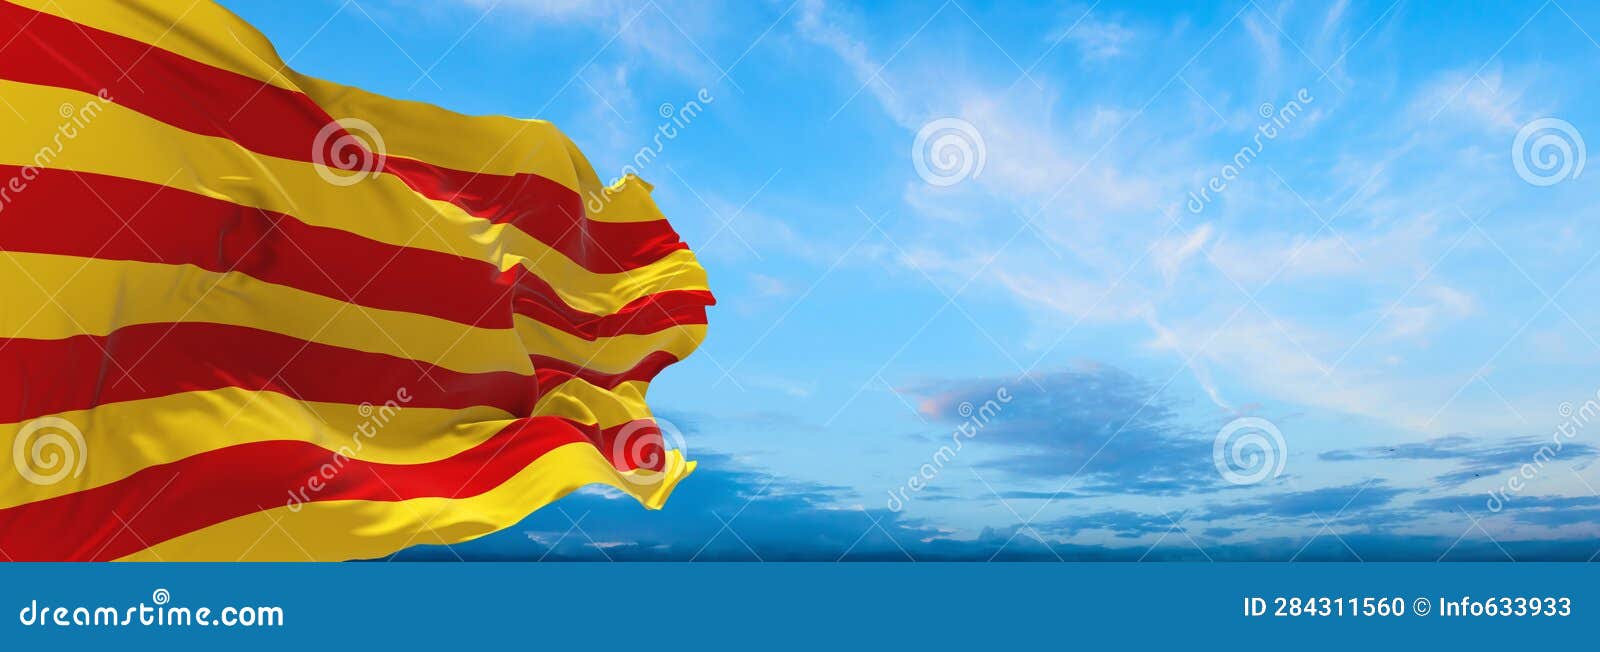 flag of ibero-romance peoples catalans at cloudy sky background, panoramic view. flag representing ethnic group or culture,